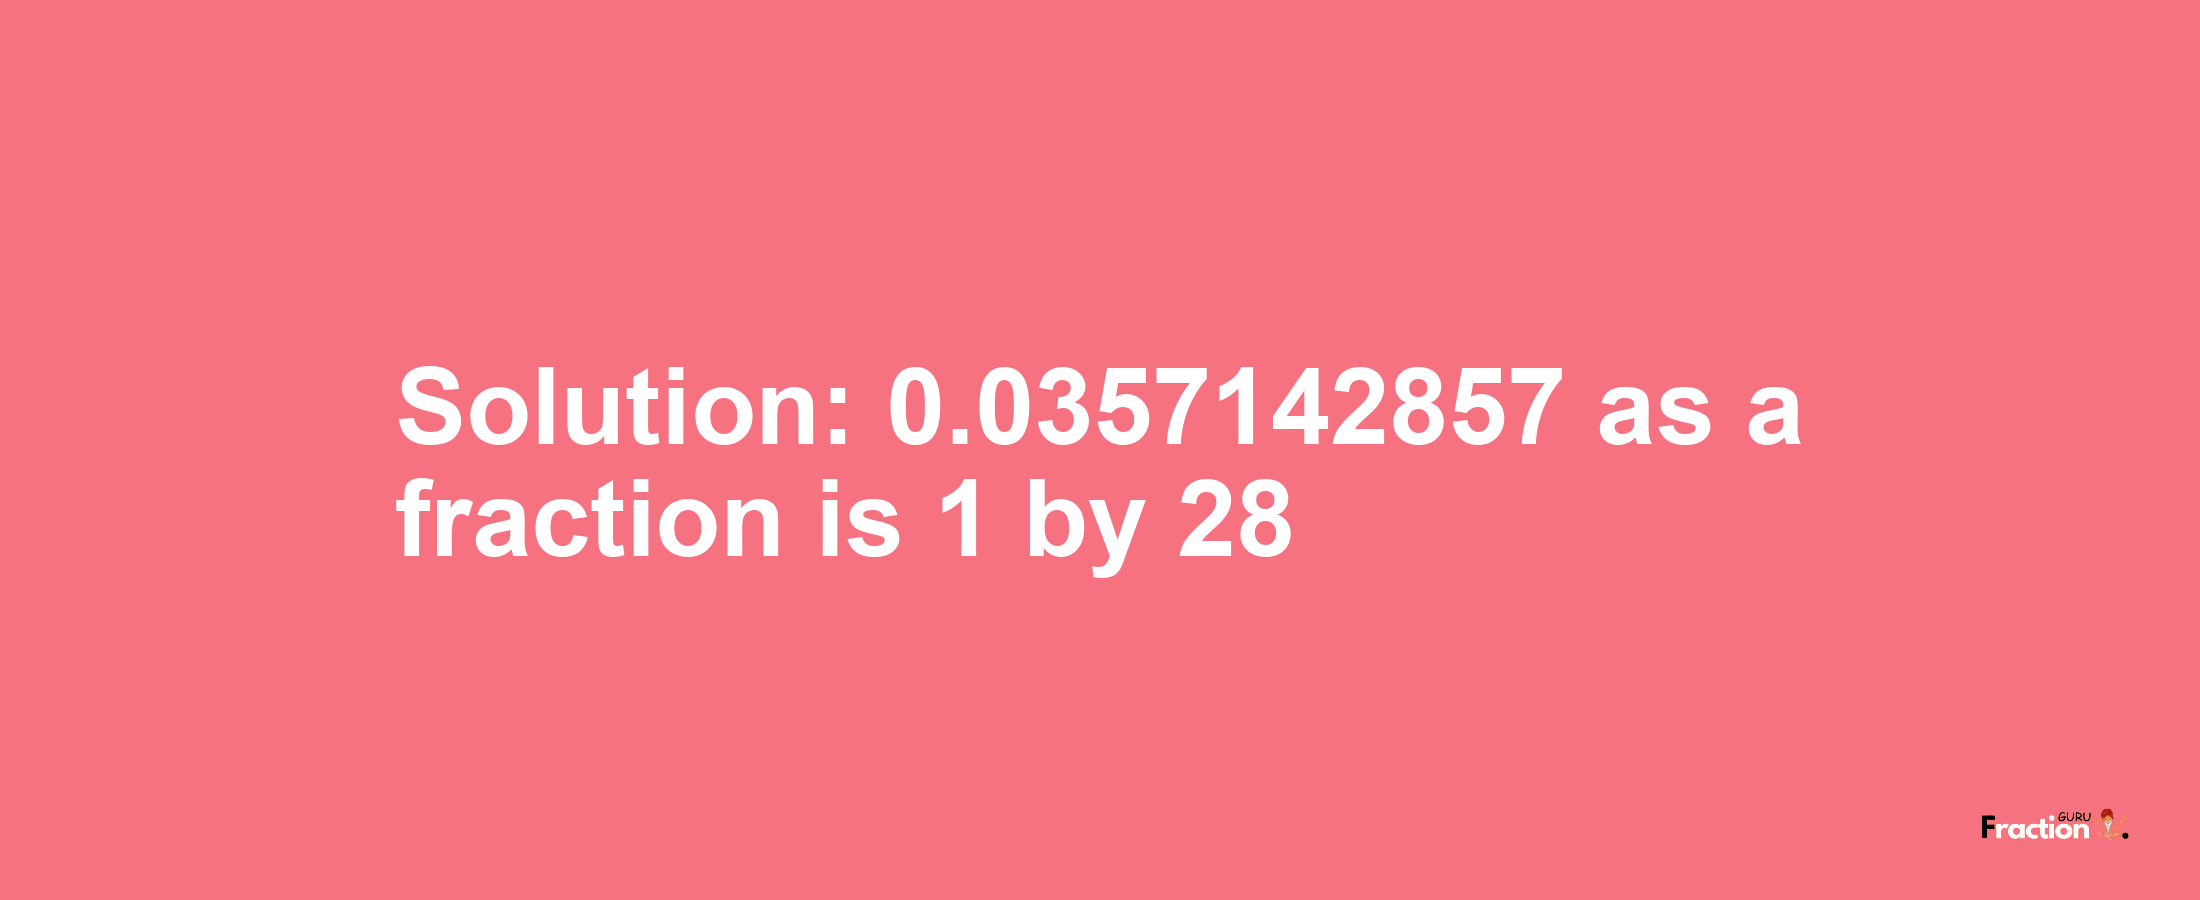 Solution:0.0357142857 as a fraction is 1/28